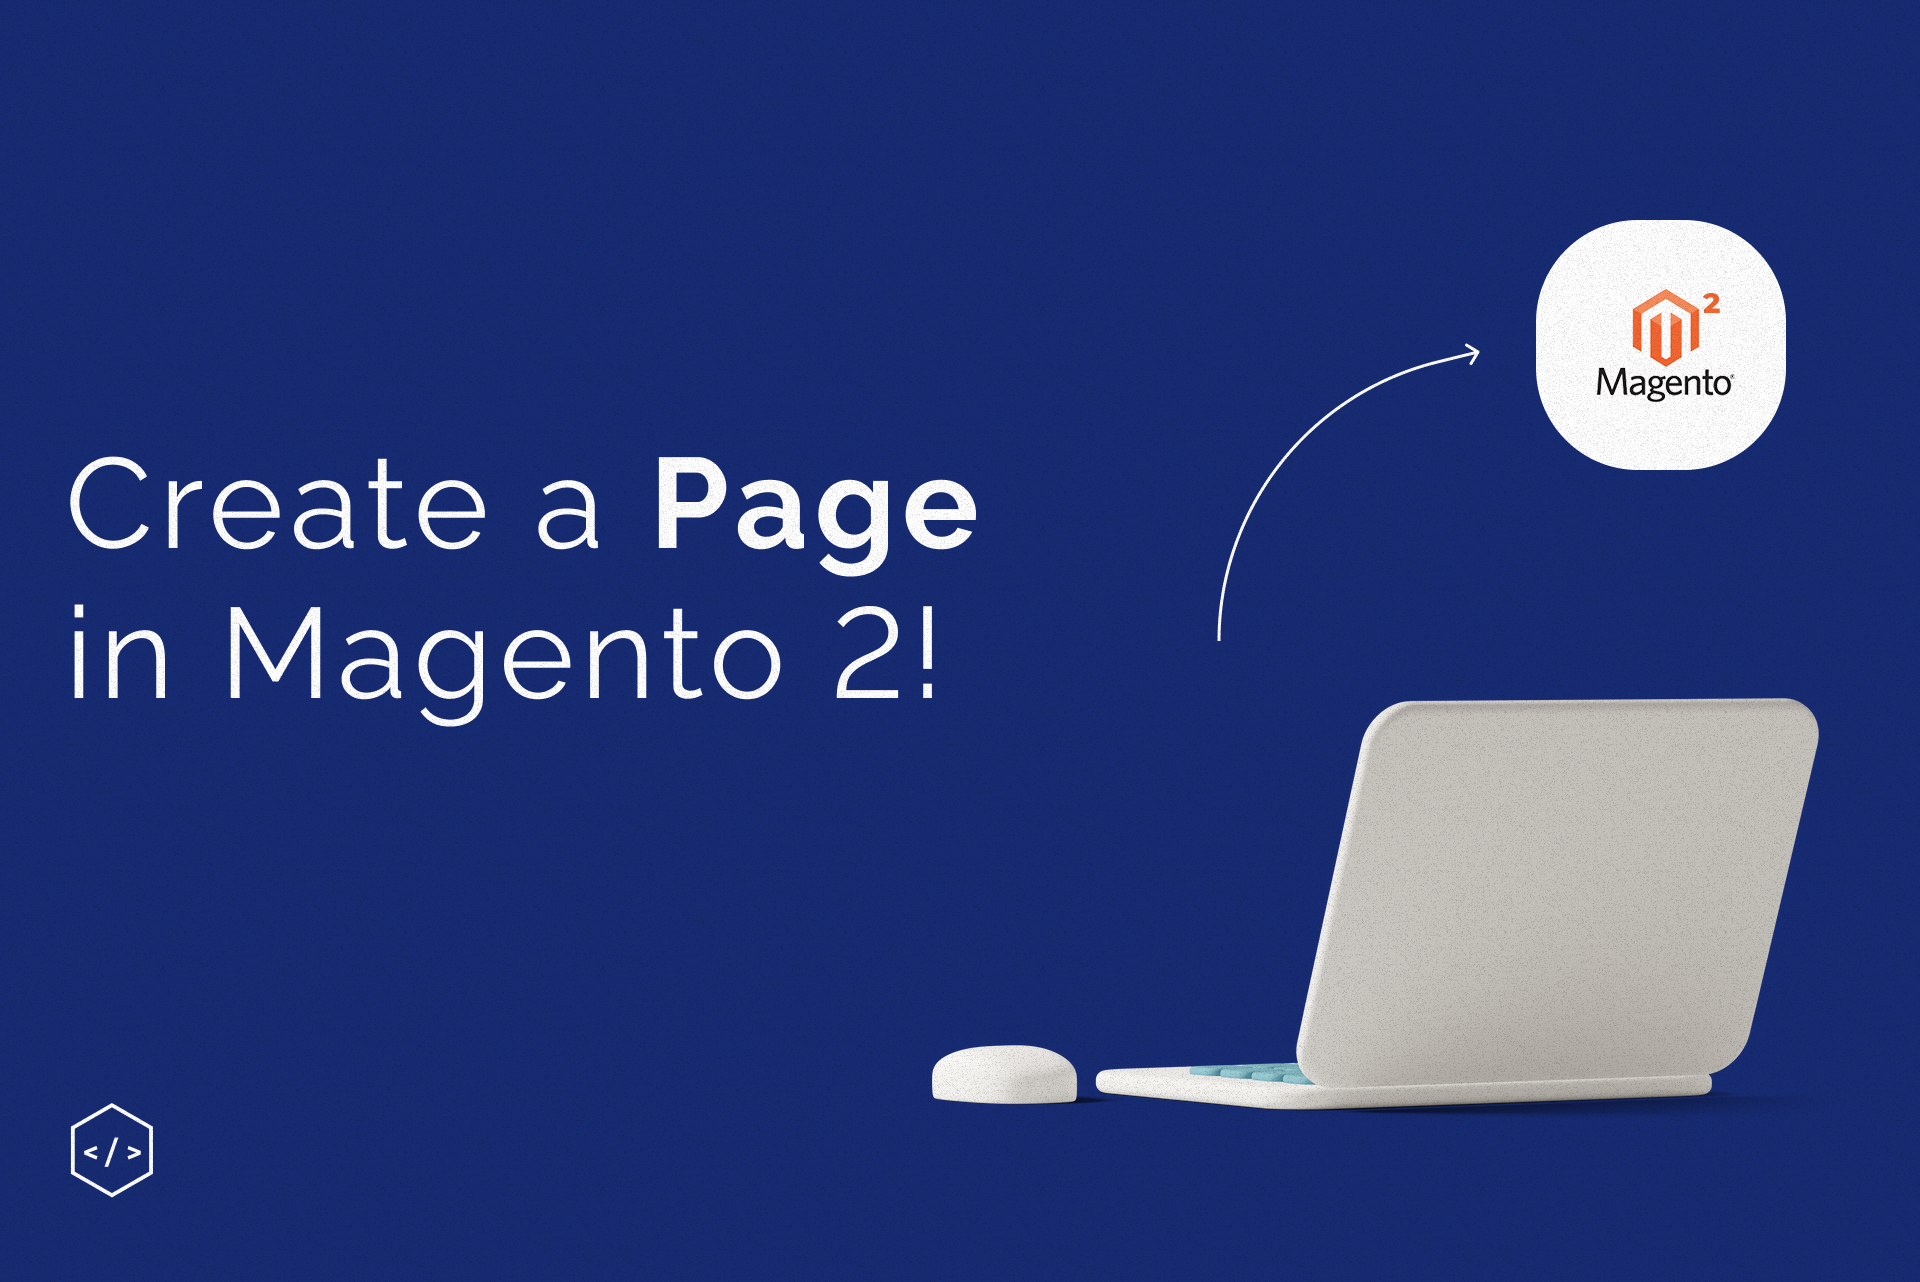 How to create a page in Magento 2 admin?